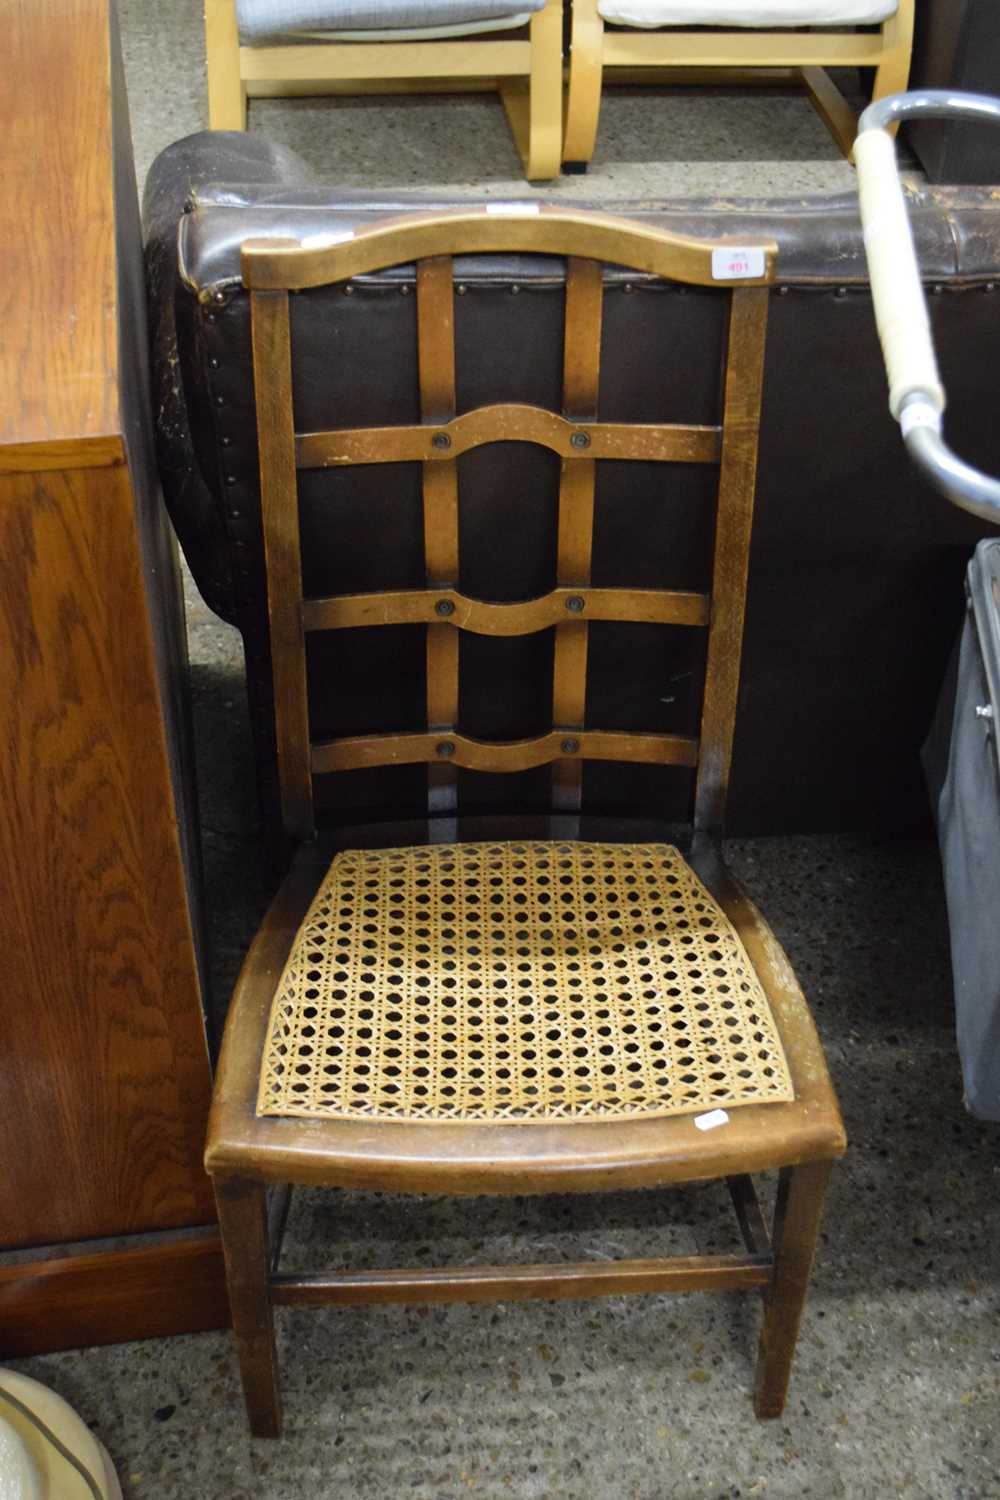 CANE SEATED AND MESHWORK BACK CHAIR